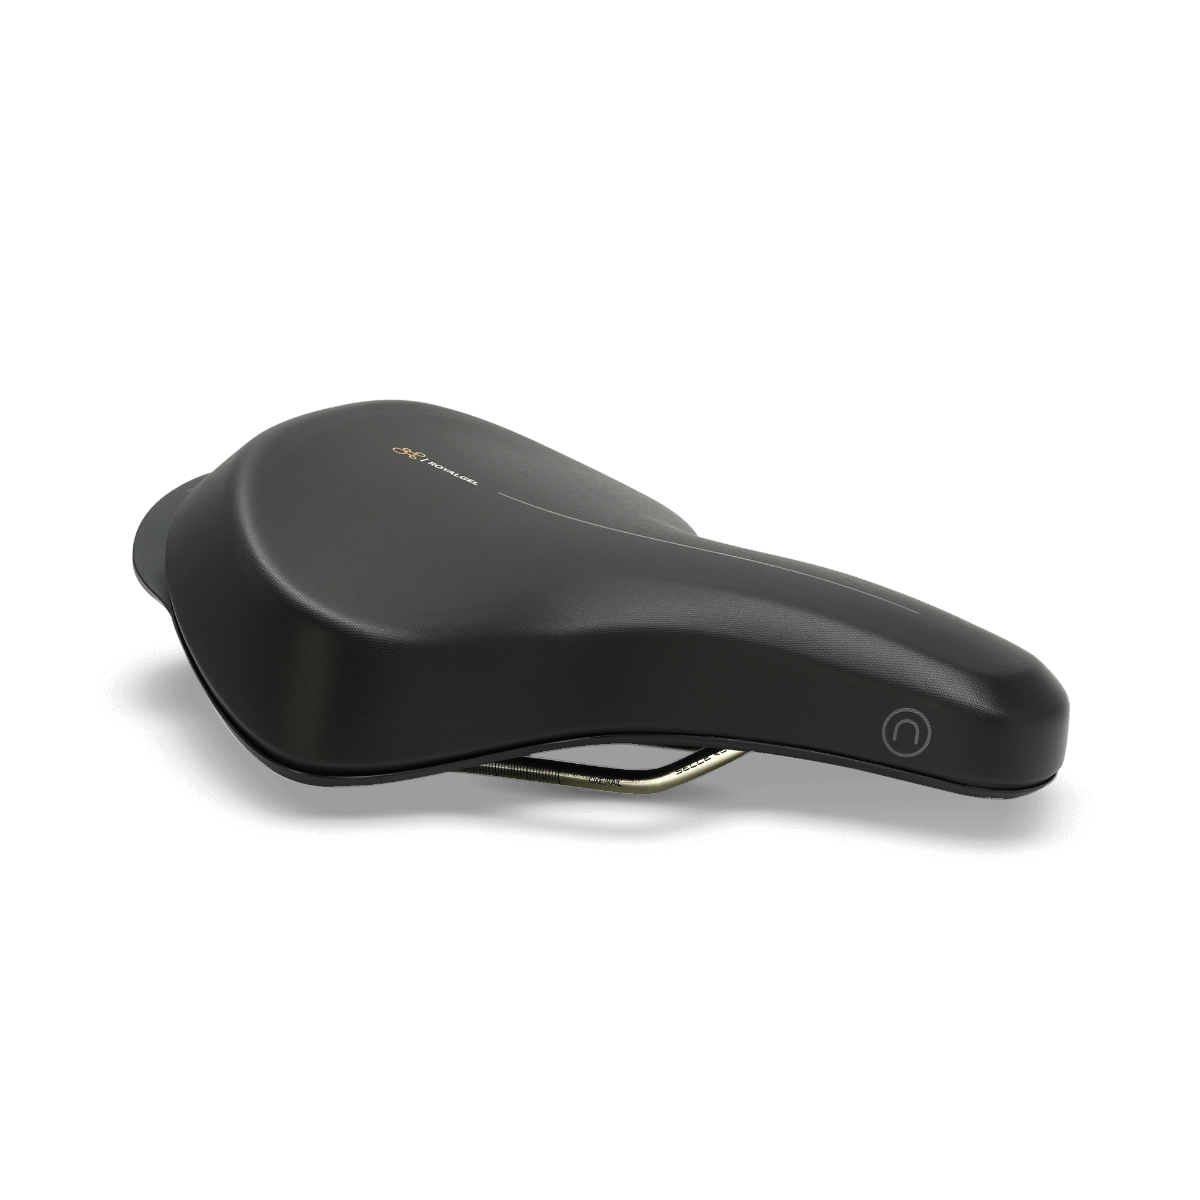 On Relaxed - Selle Royal